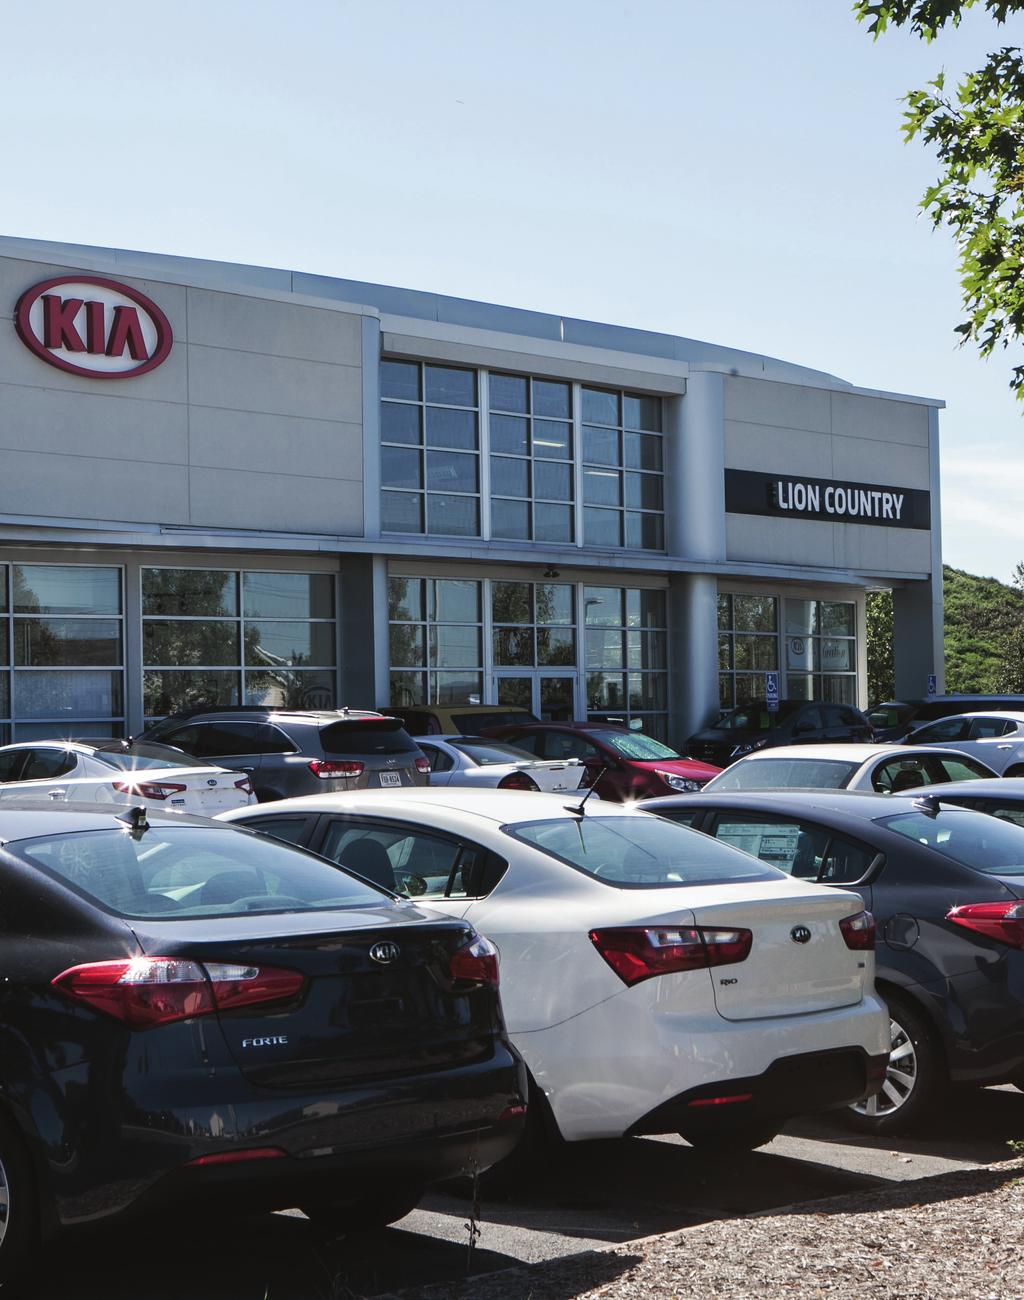 A LOCAL DEALERSHIP, STAYING AHEAD OF THE CURVE. How Lion Country Kia attracts and retains today s modern car buyers.